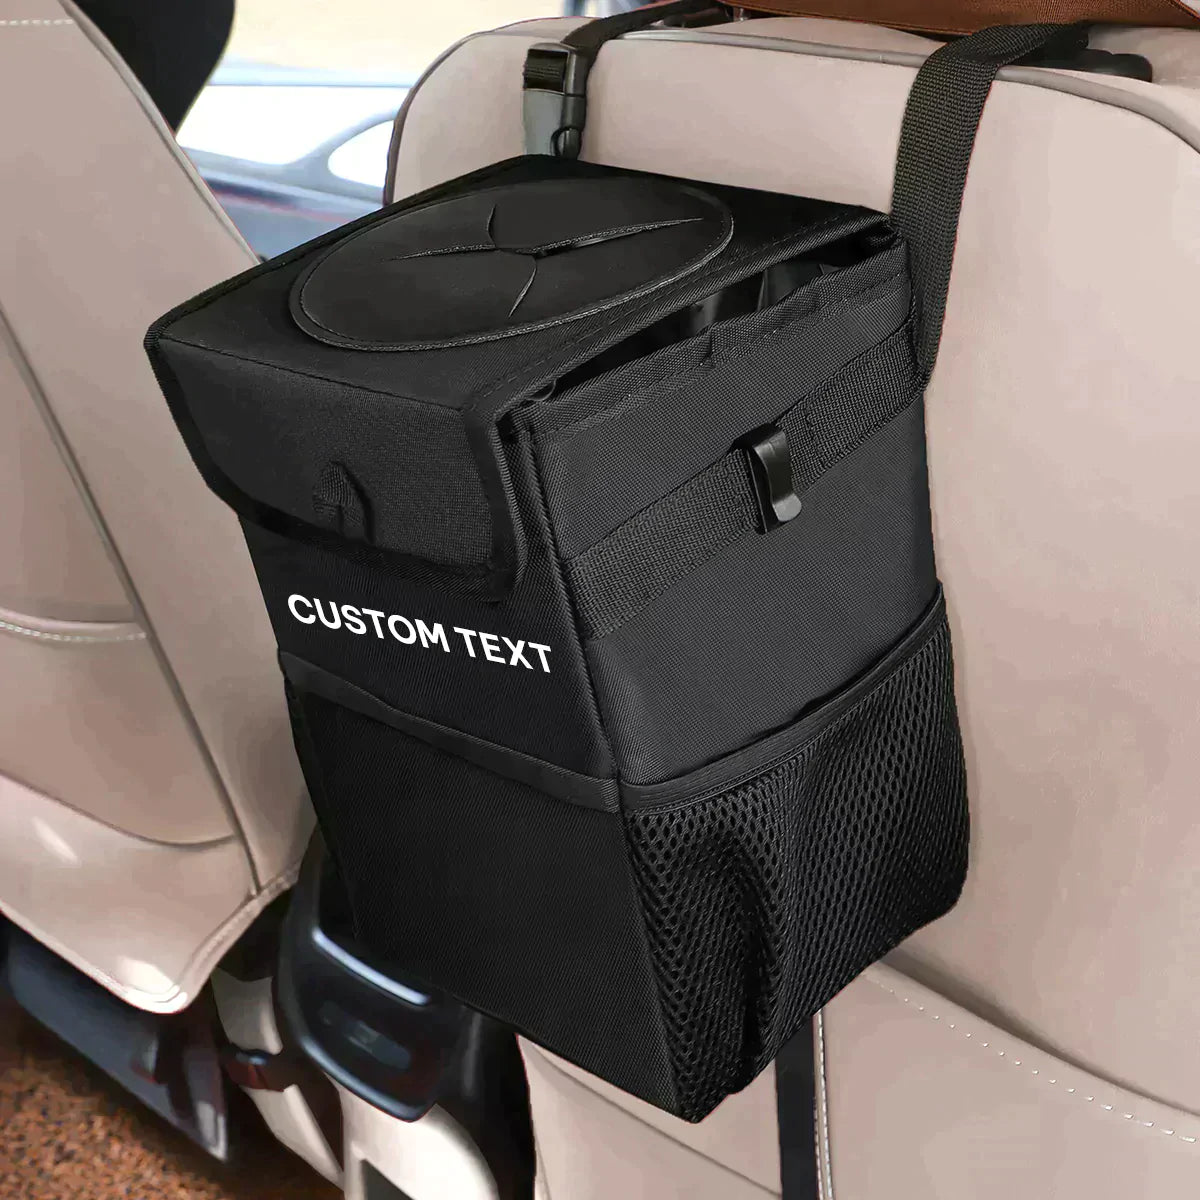 Custom Text and Logo Waterproof Car Trash Can with Lid and Storage Pockets, Fit with all car, 100% Leak-Proof Car Organizer, Waterproof Car Garbage Can, Multipurpose Trash Bin for Car - Delicate Leather